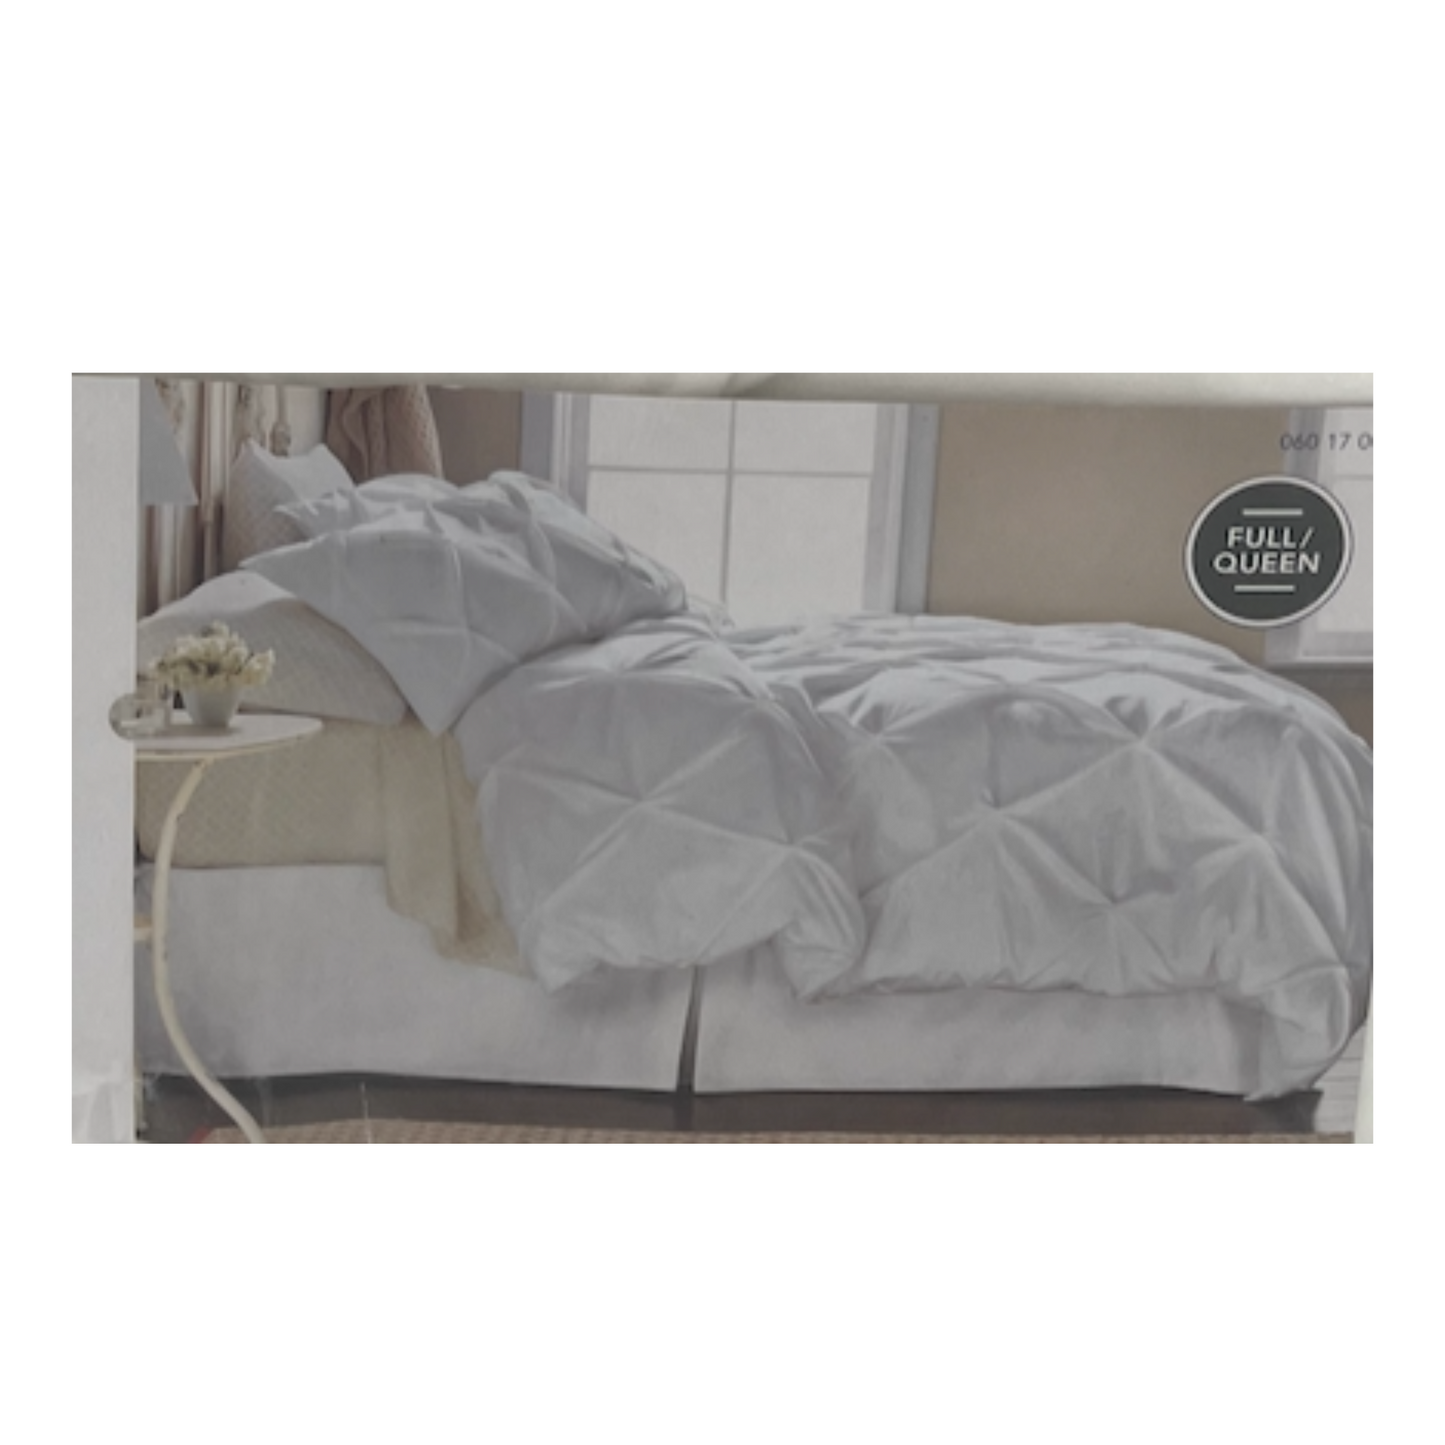 Threshold 3 Piece Duvet Cover Set Machine Washable with Corner Ties (Full/Queen Bed)